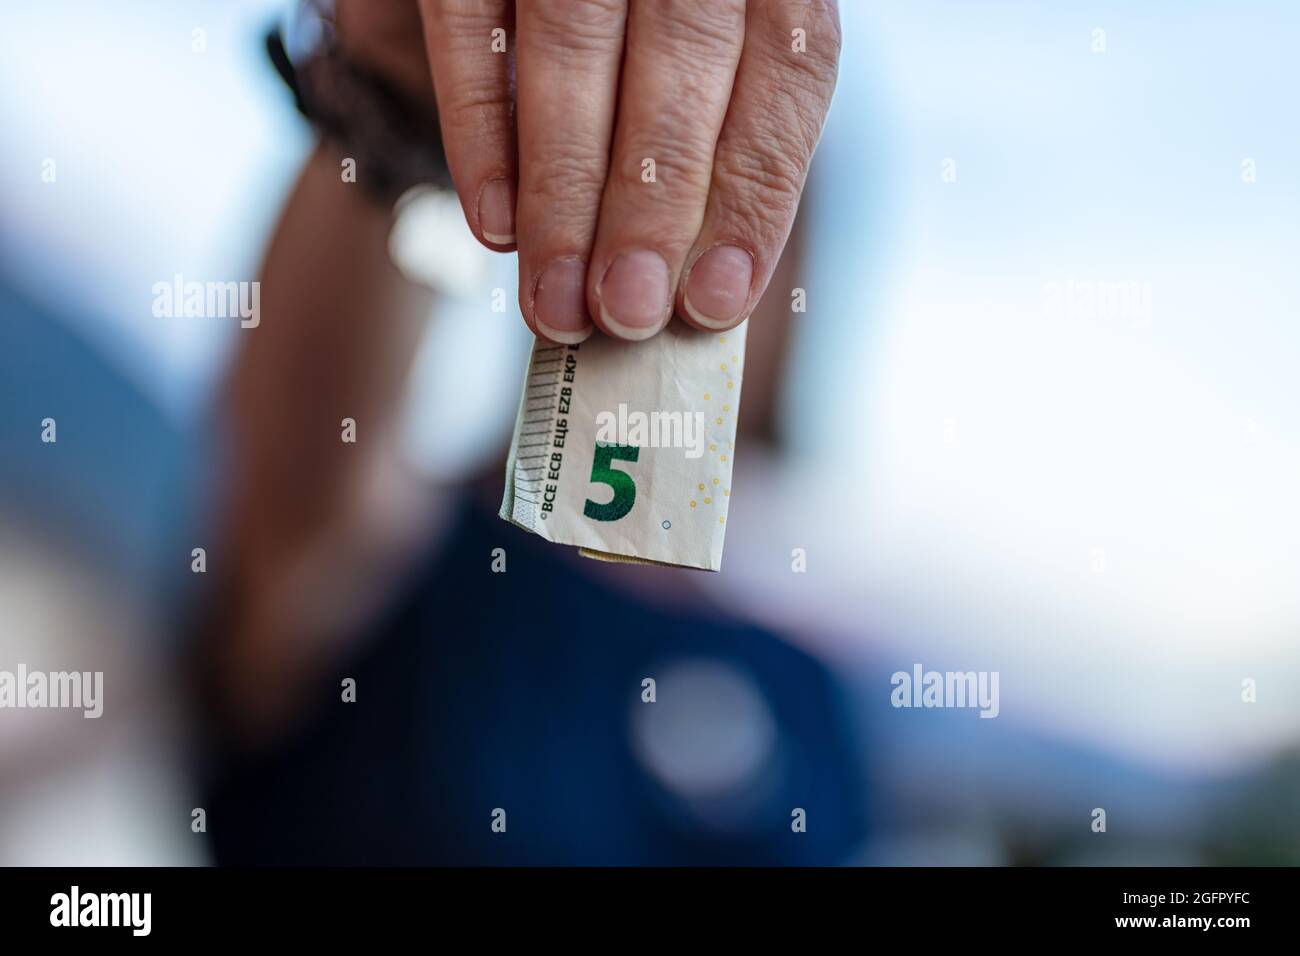 five euro in cash, focus on a folded European currency, held by four unrecognizable person's finger, shallow depth of field on the body in background Stock Photo